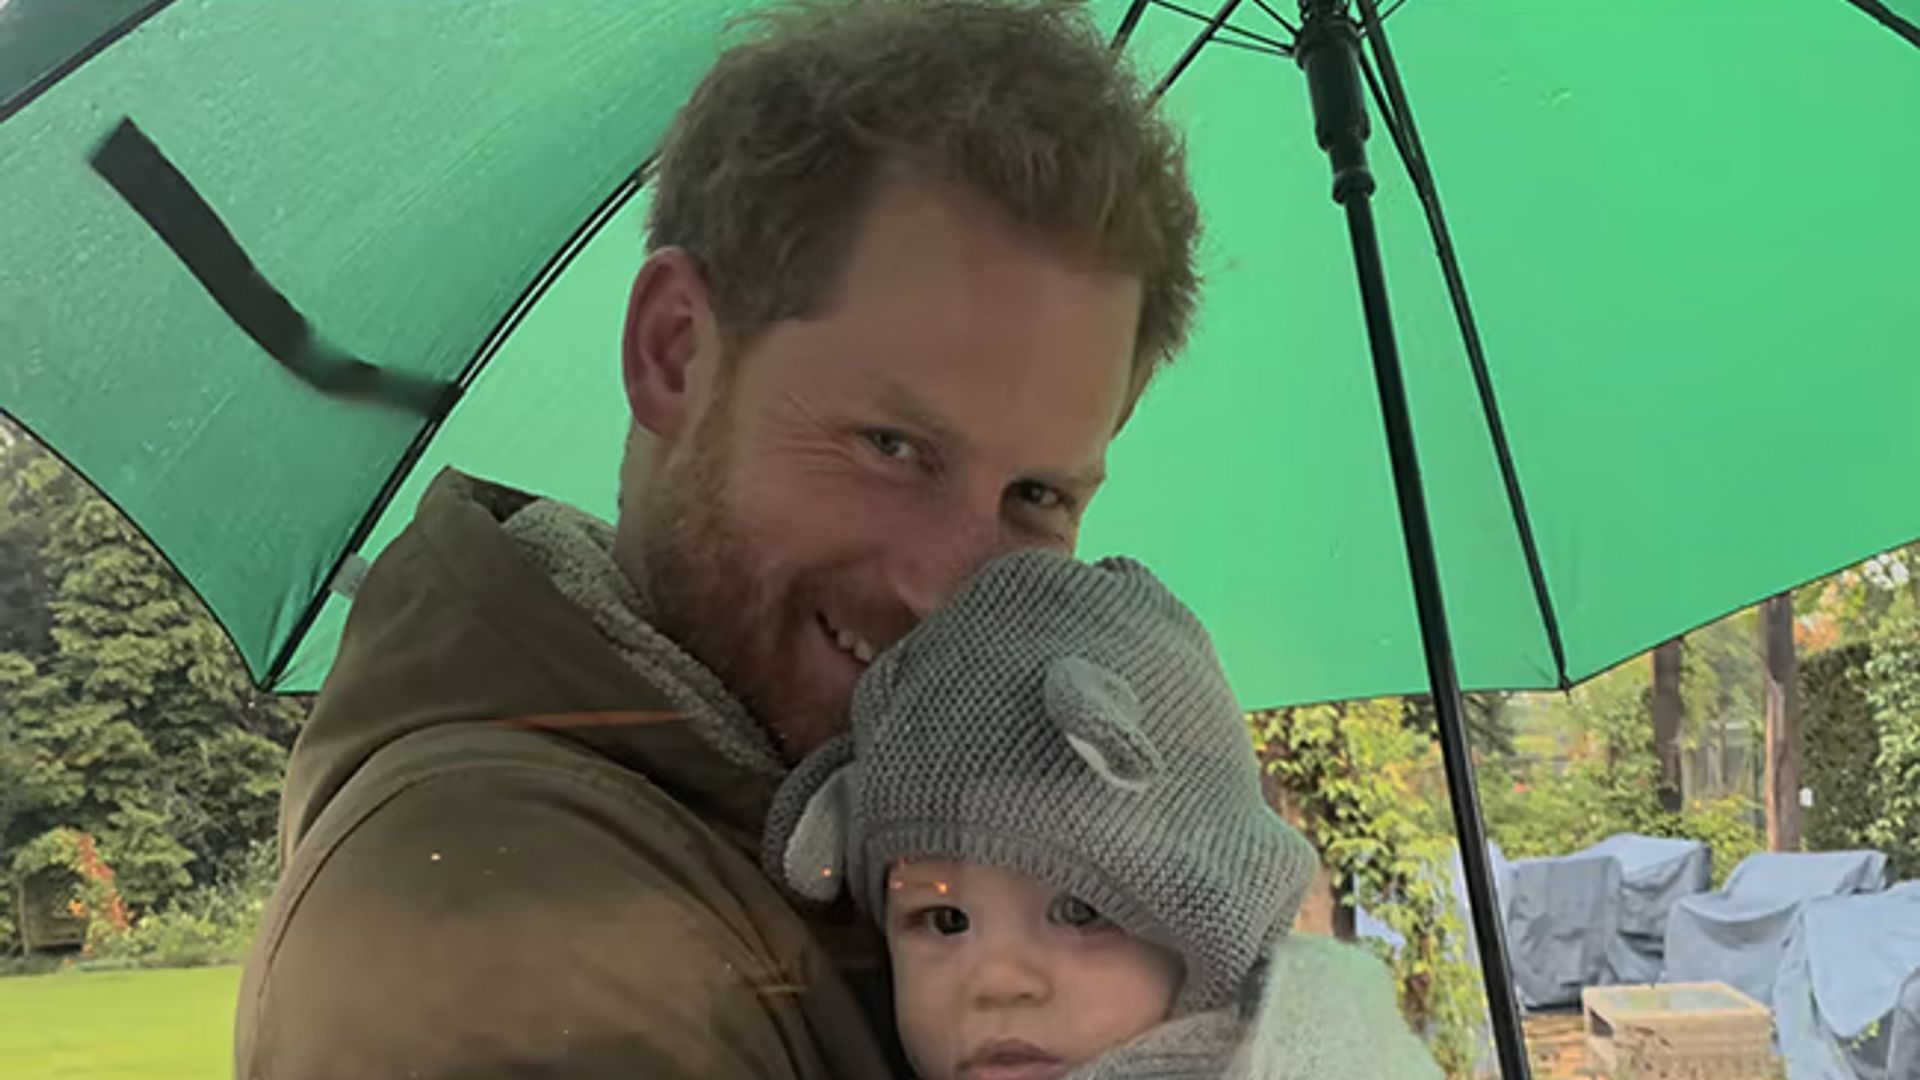 Prince Archie looks JUST like royal dad Prince Harry in these 5 photos